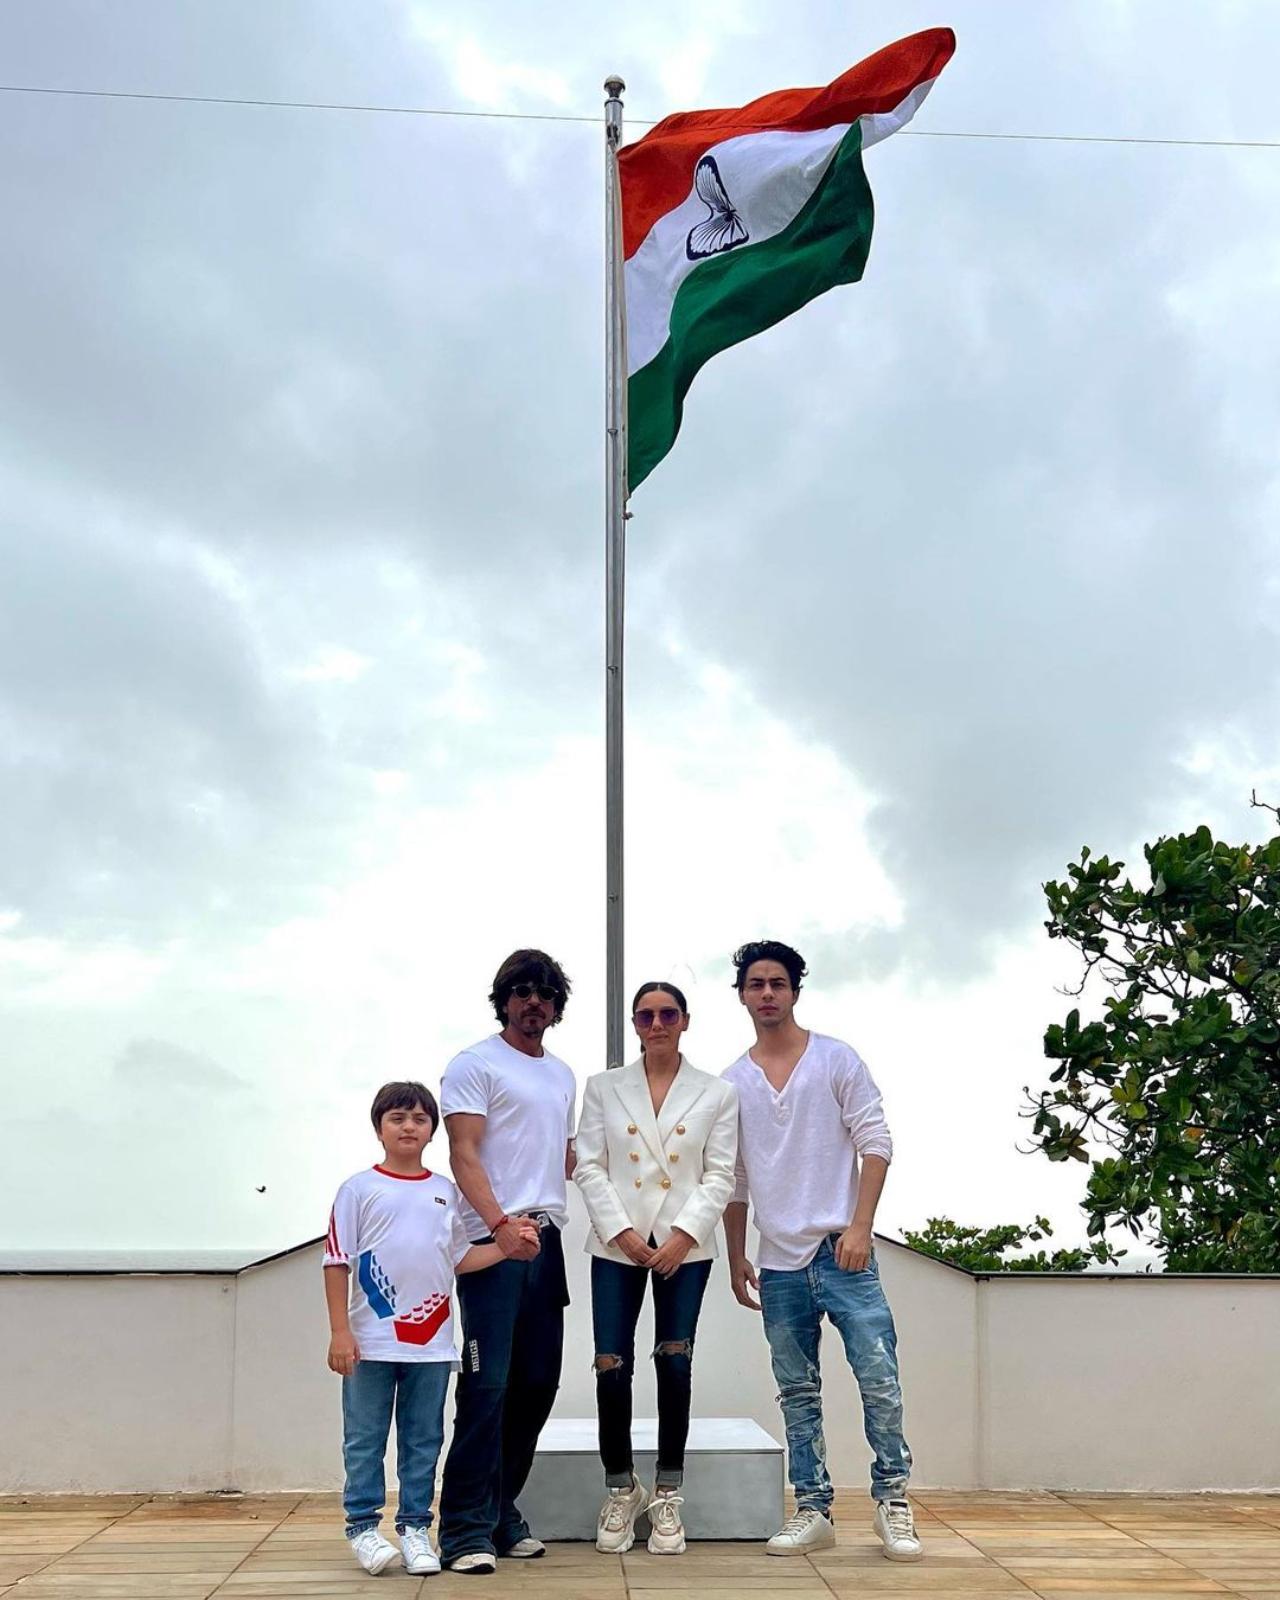 Shah Rukh Khan
The superstar hoisted the national flag on August 14 as part of the Har Ghar Tiranga Initiative. He posed with his family at Mannat in Mumbai after the flag hoisting. 